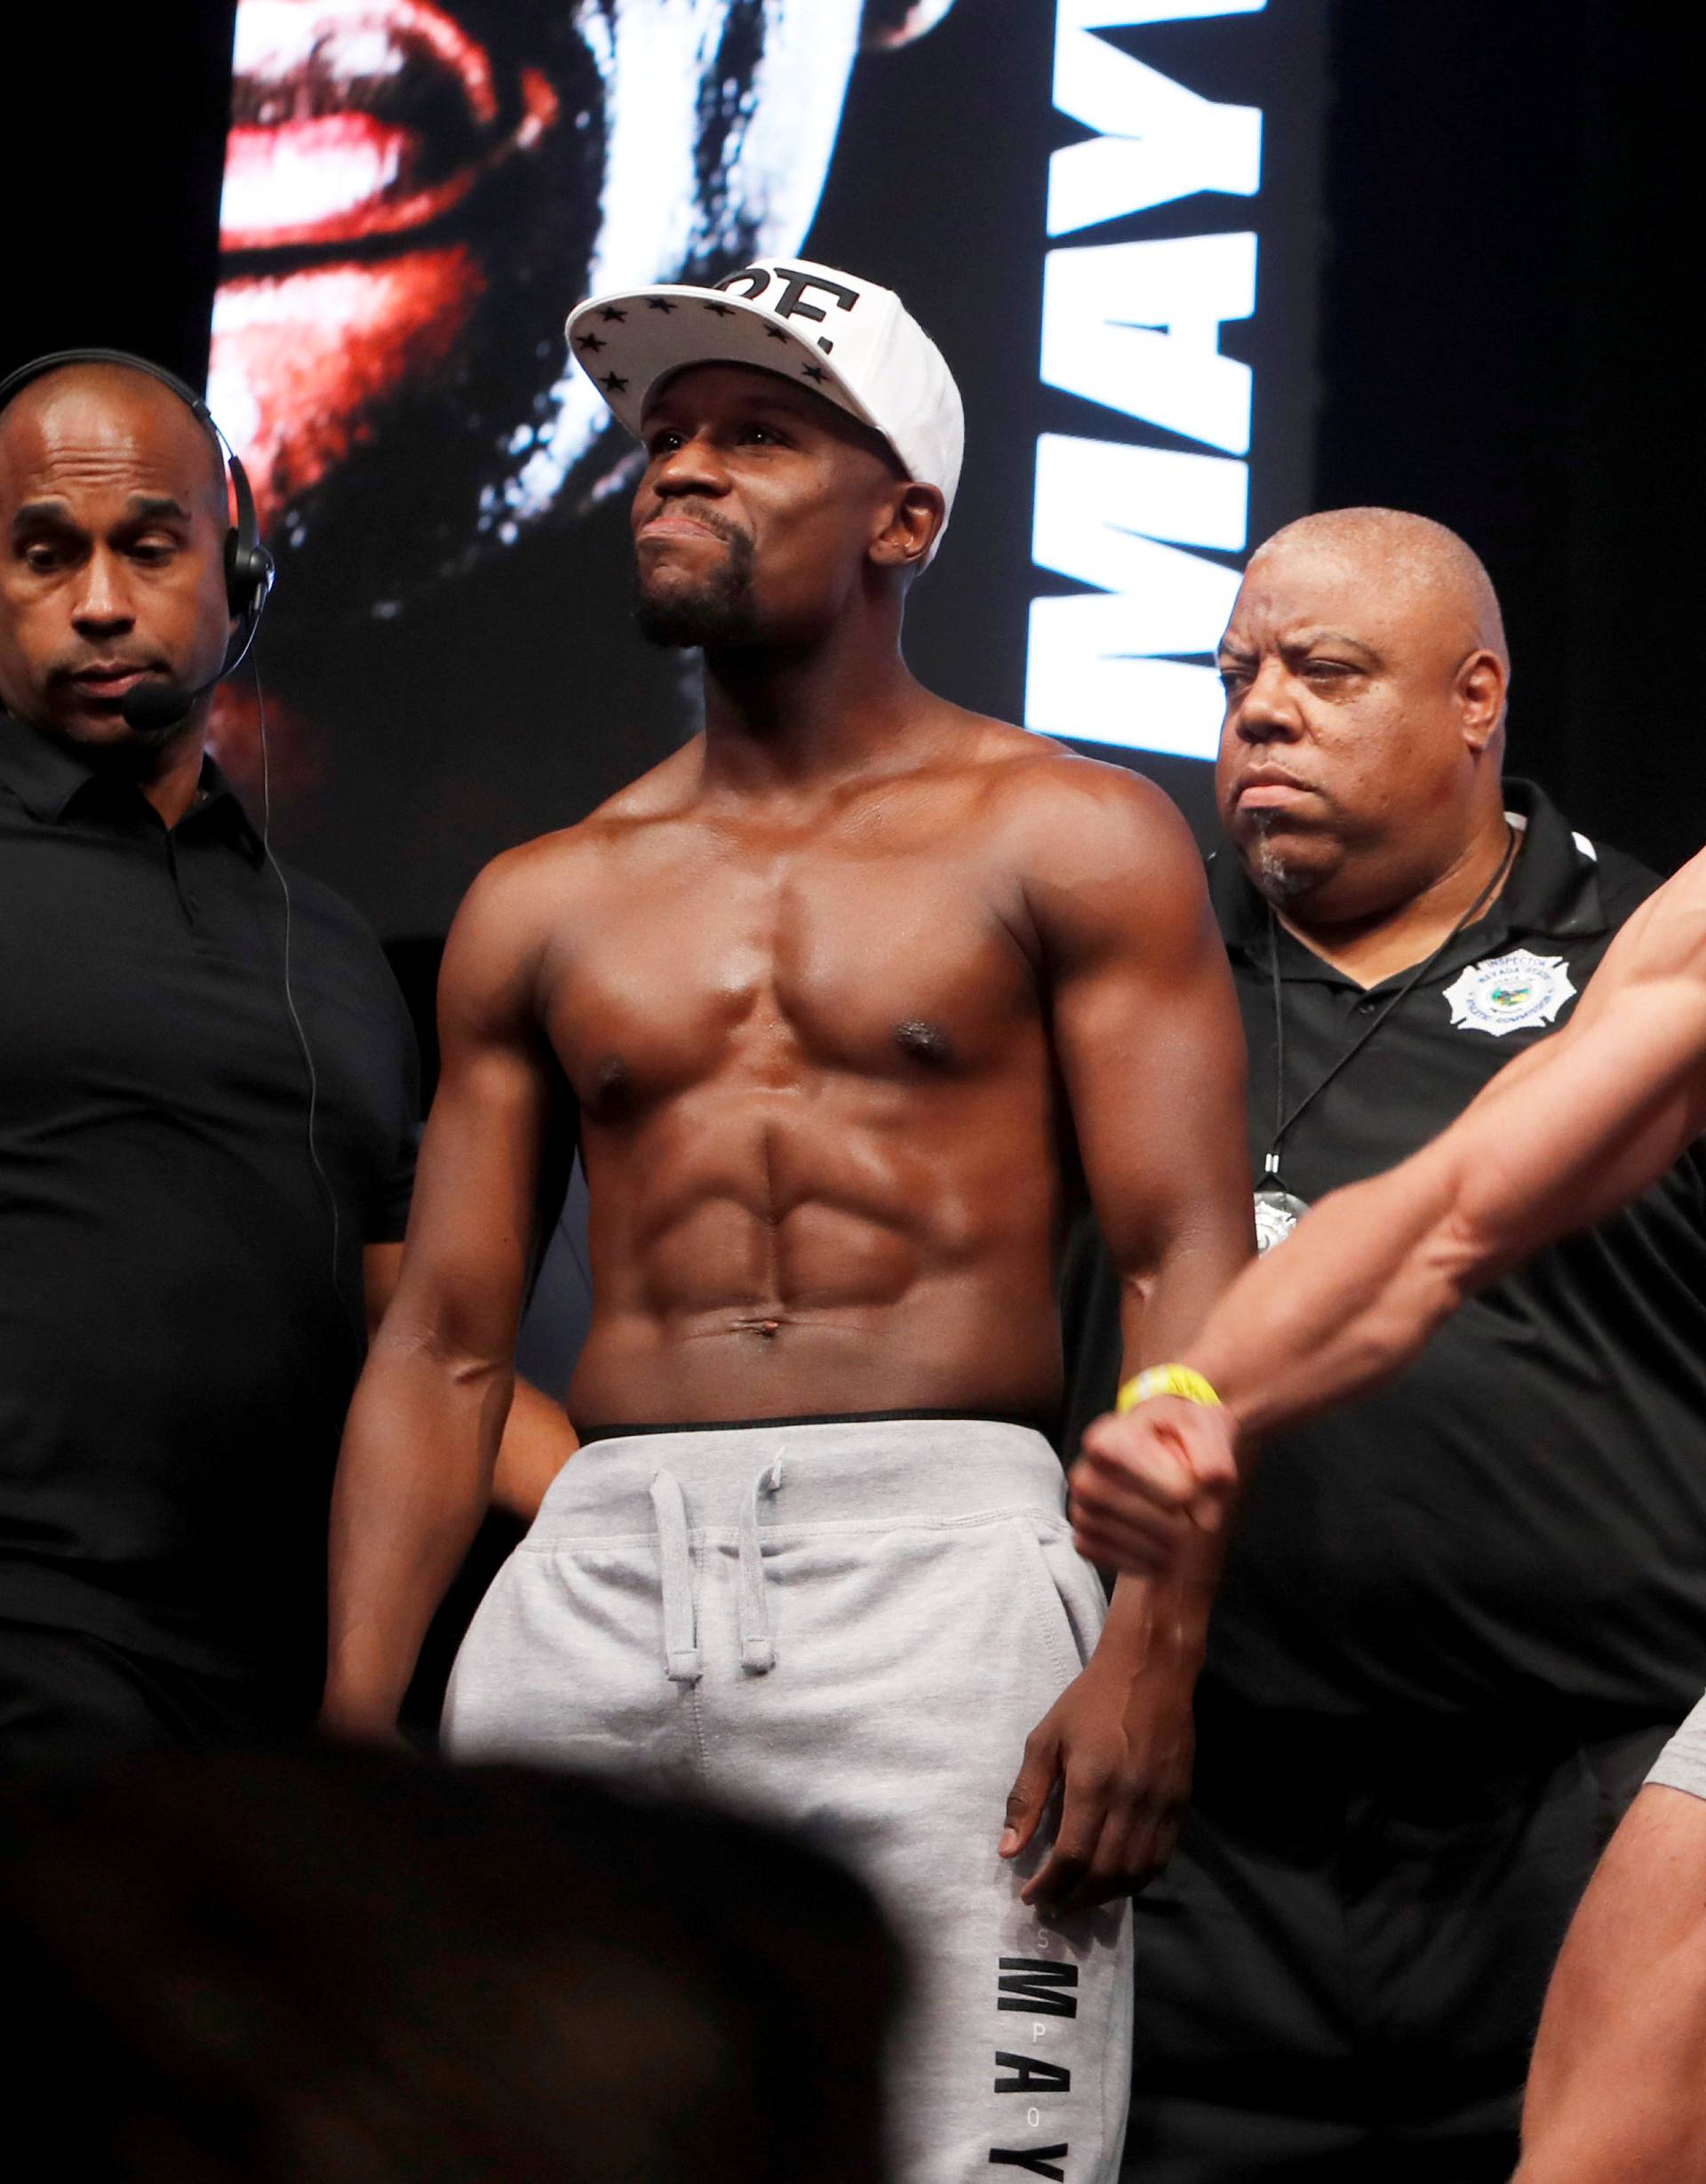 Undefeated boxer Floyd Mayweather Jr. (L) of the U.S. and UFC lightweight champion Conor McGregor of Ireland pose during their official weigh-in at T-Mobile Arena in Las Vegas